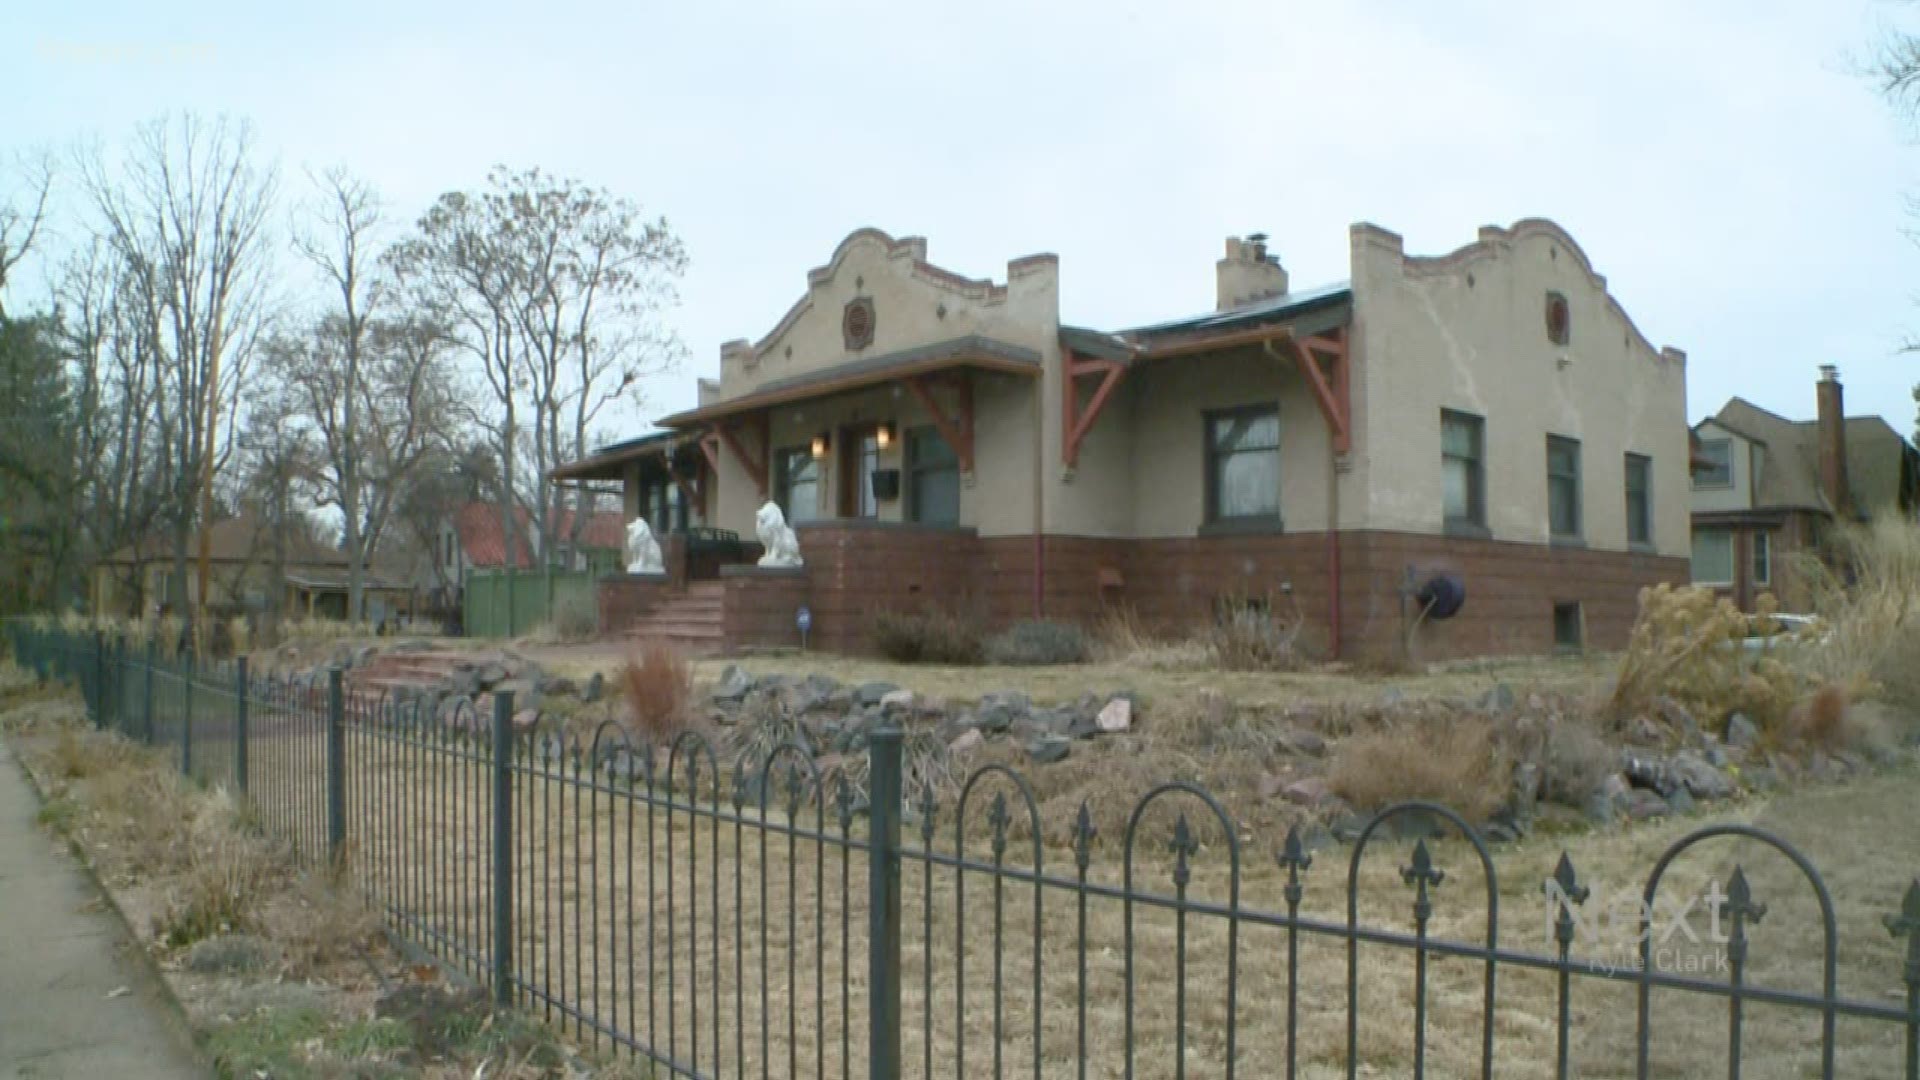 There's a house in Denver that was home to the greats. Denver City Council will decide if that home should be protected as a historic landmark.